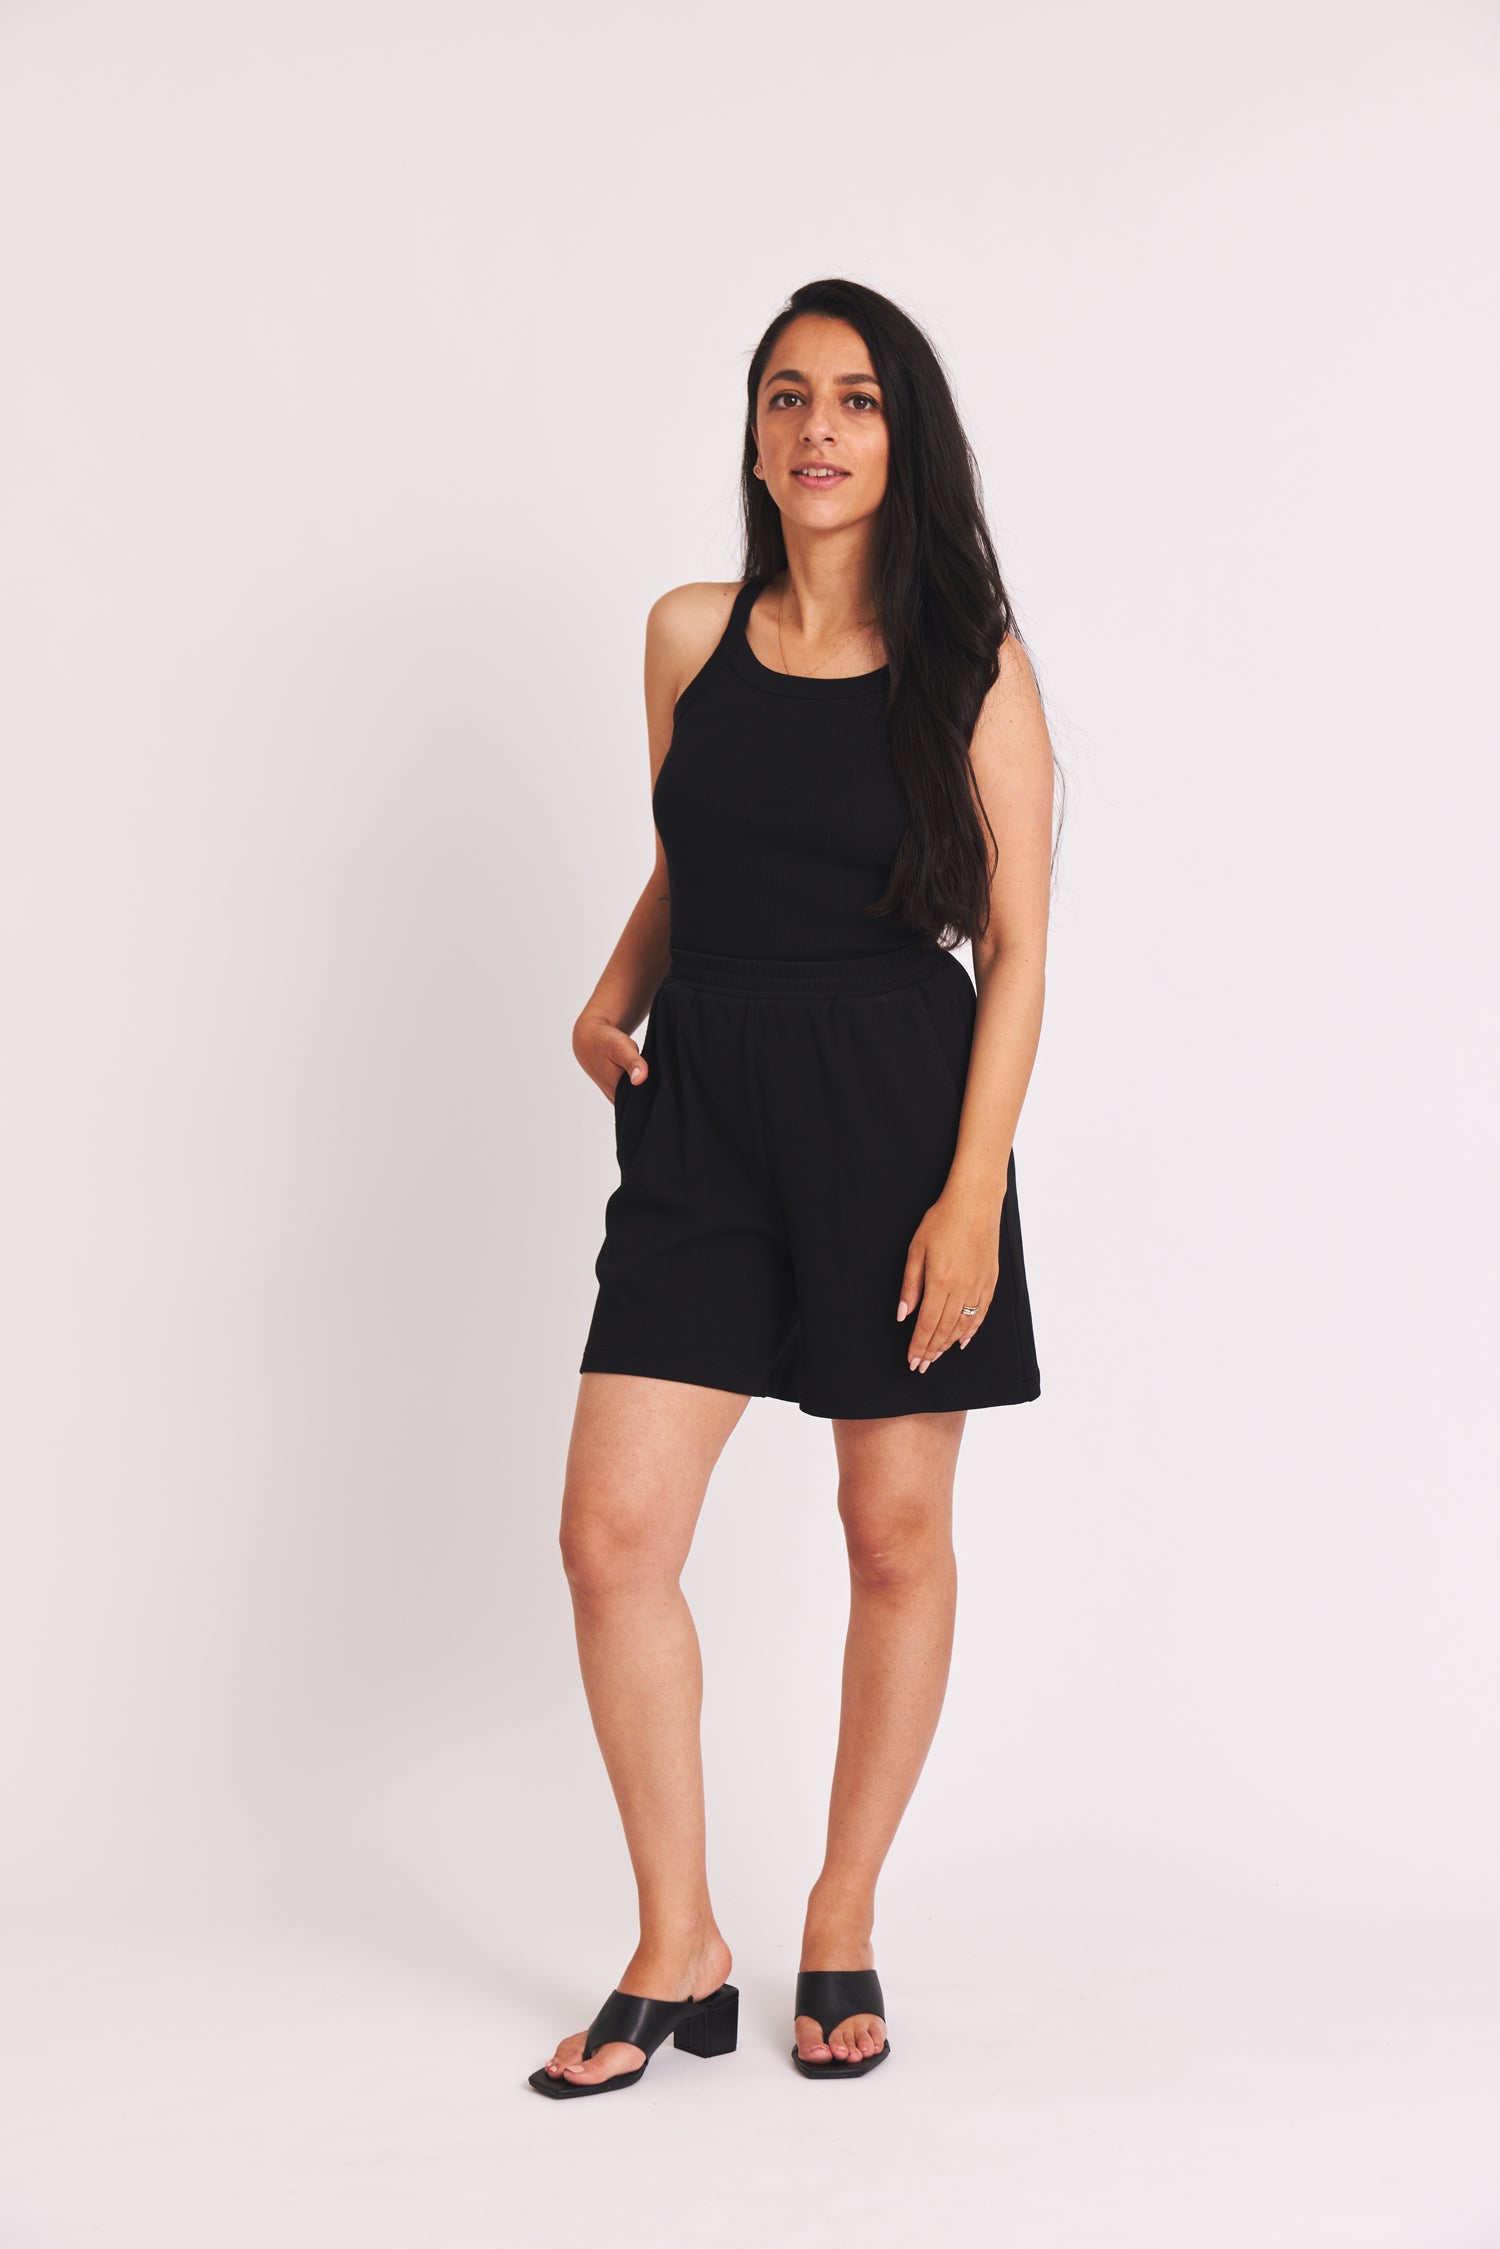 Black Betti shorts made of organic cotton from Baige the Label